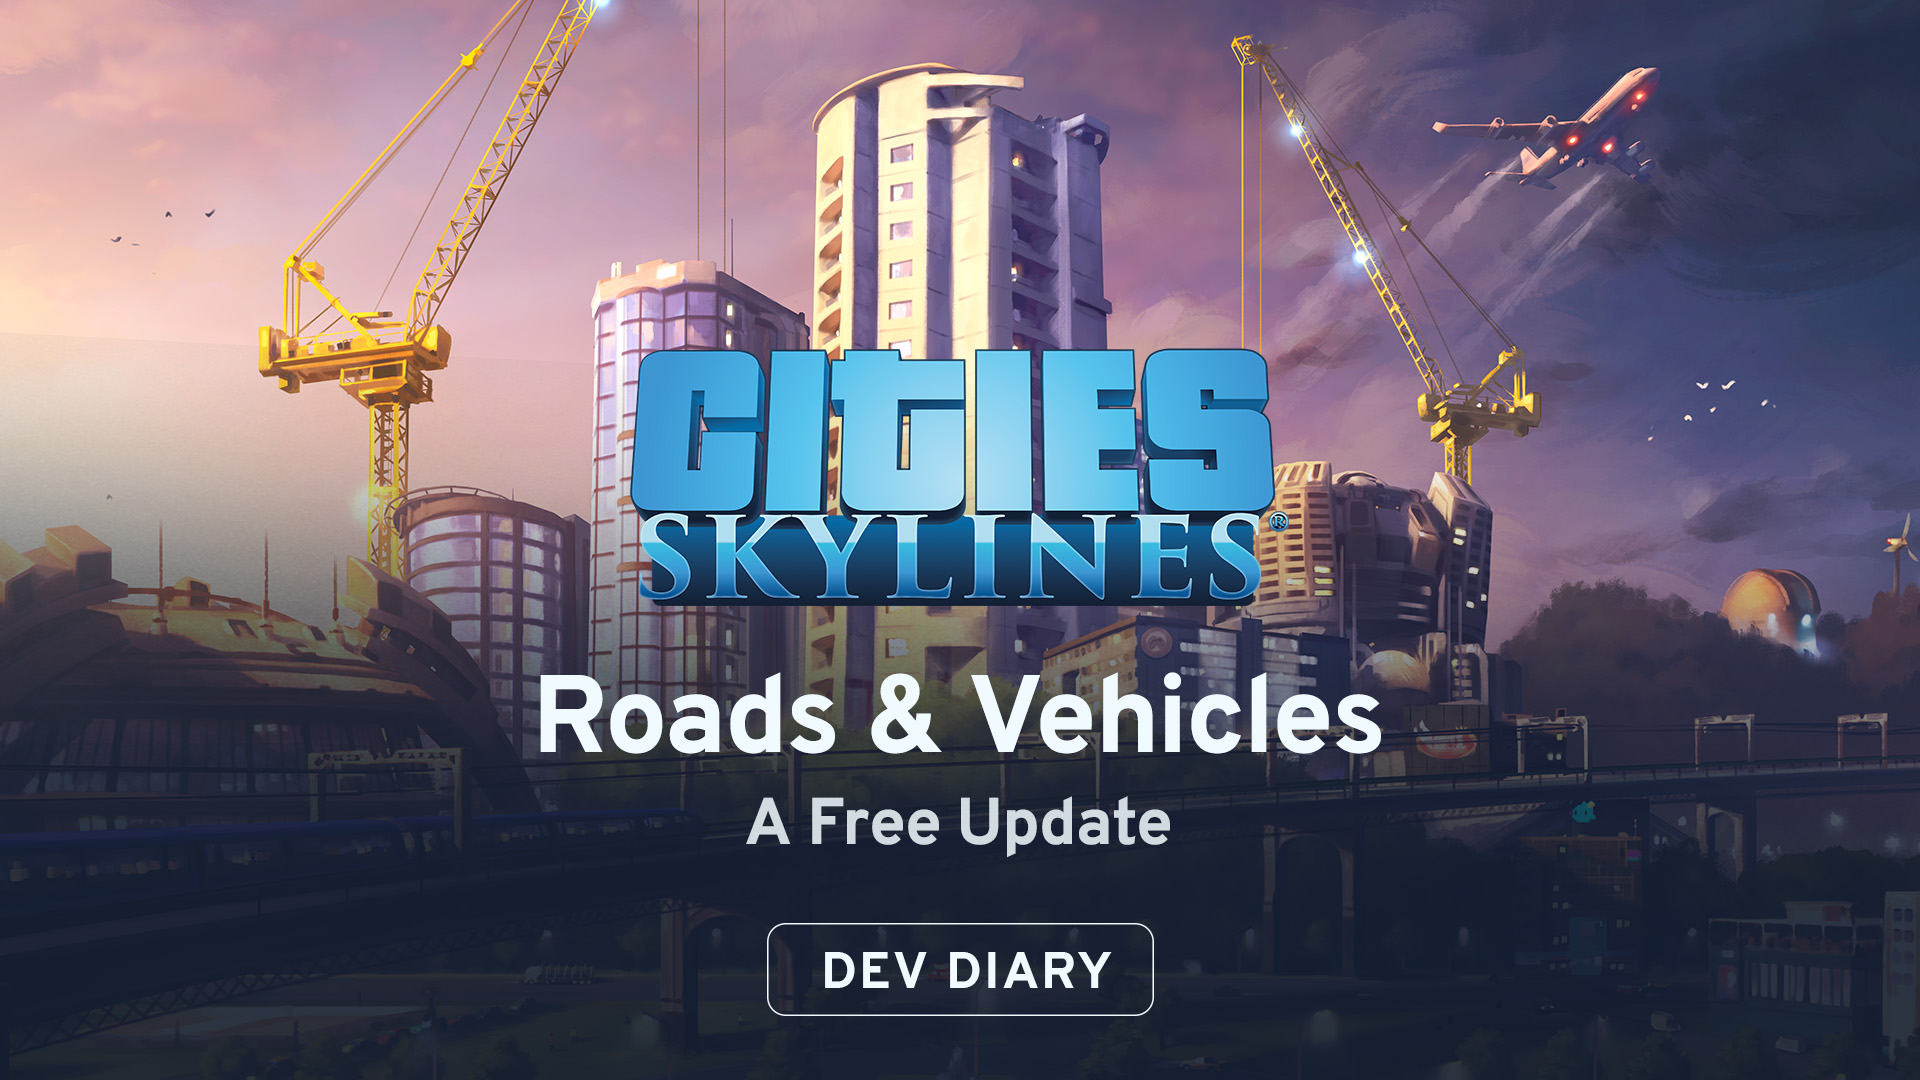 Cities: Skylines on Twitter: "Your all you need to guide for the Roads &amp; Vehicles Free Update! Read the Dev Diary - https://t.co/RCkxVvaN7y https://t.co/EigQKNDzp1" /